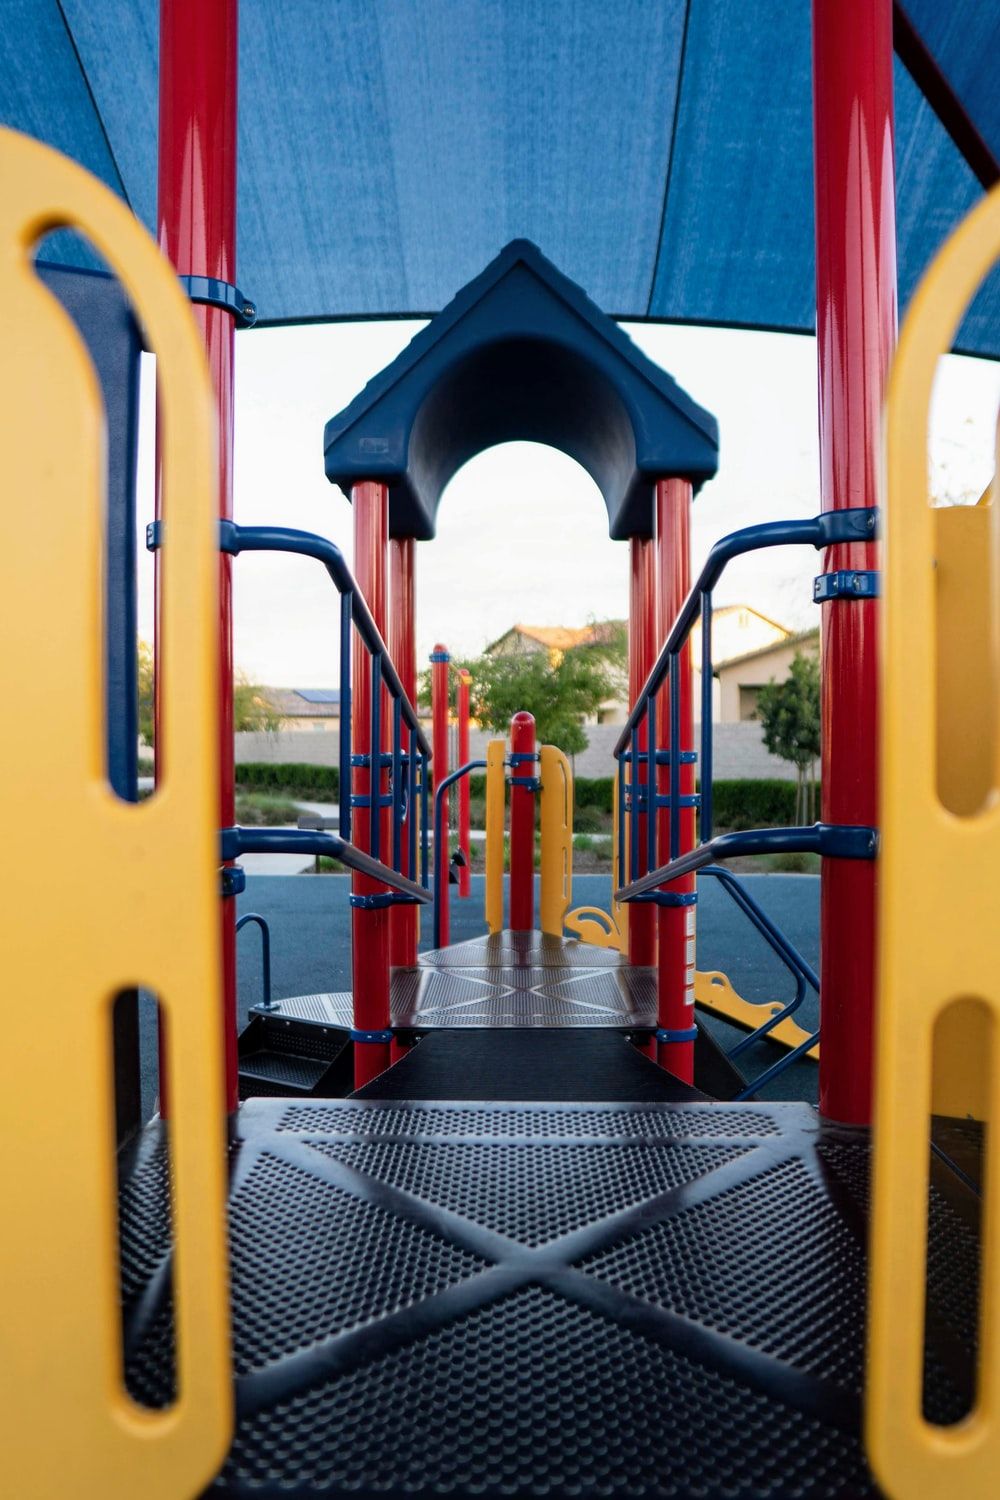 Playground Picture. Download Free Image